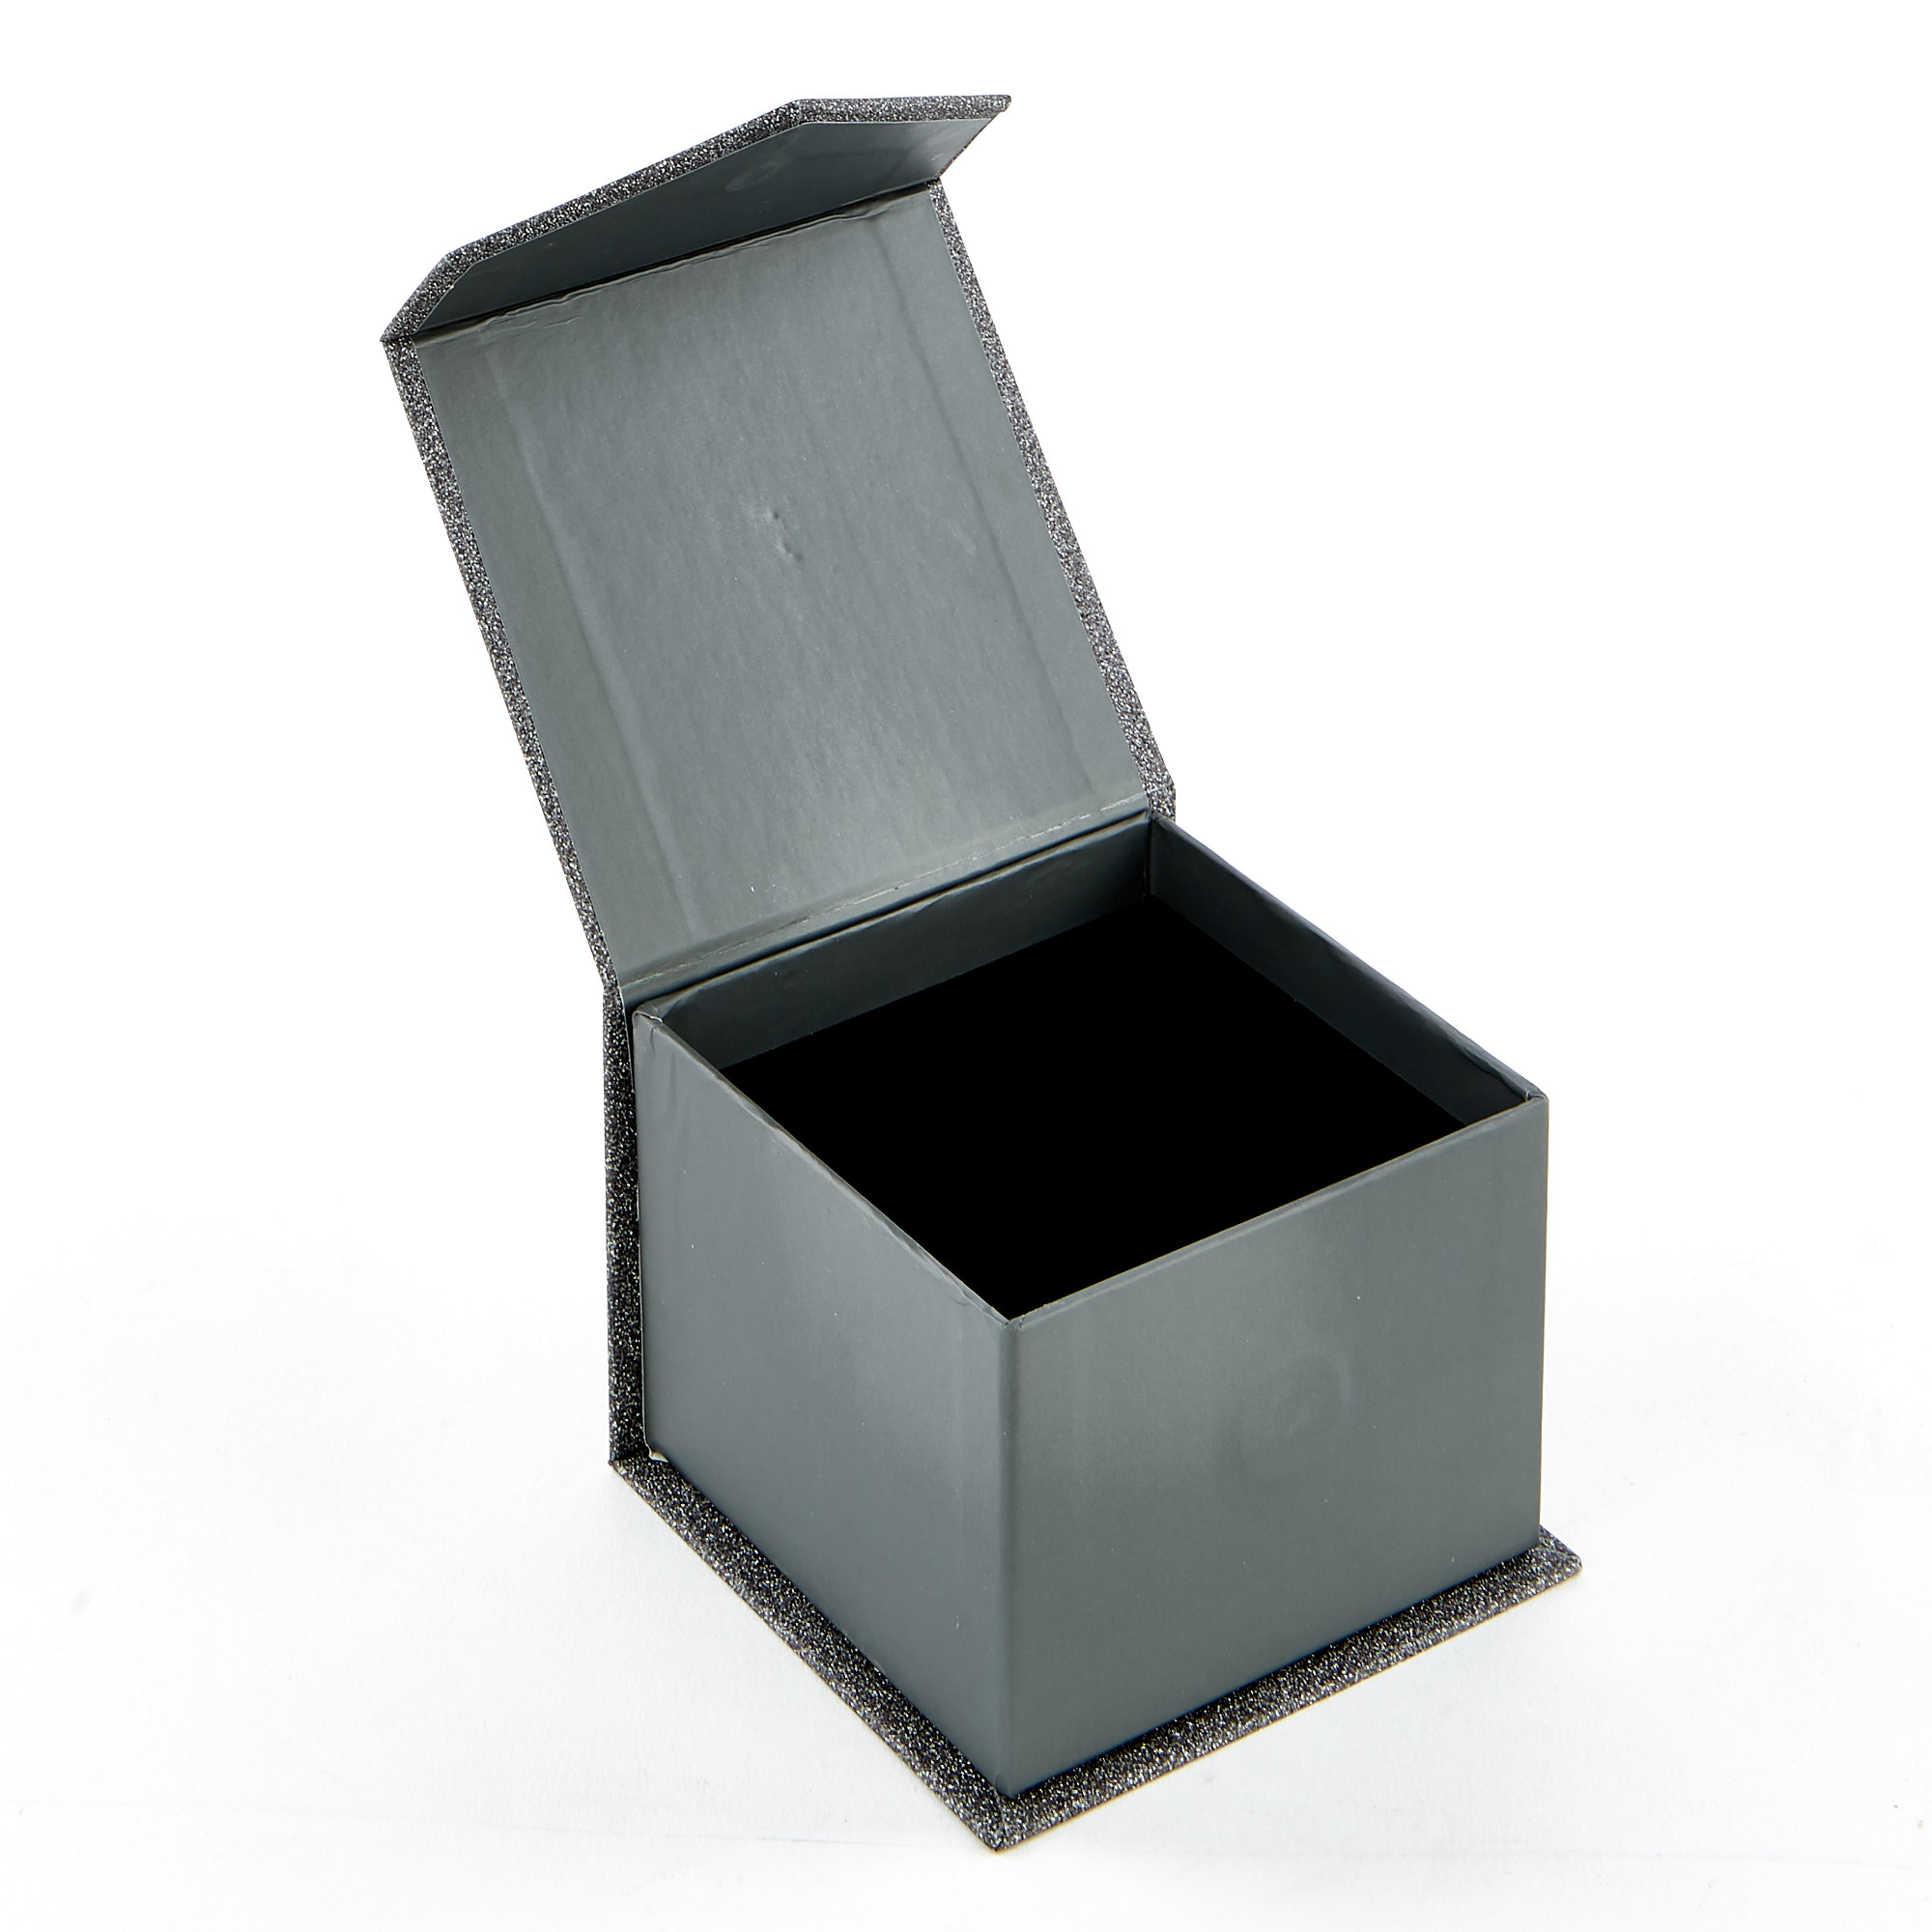 Buy Silver & Grey Jewellery Gift Boxes - Set Of 3 for GBP 4.47